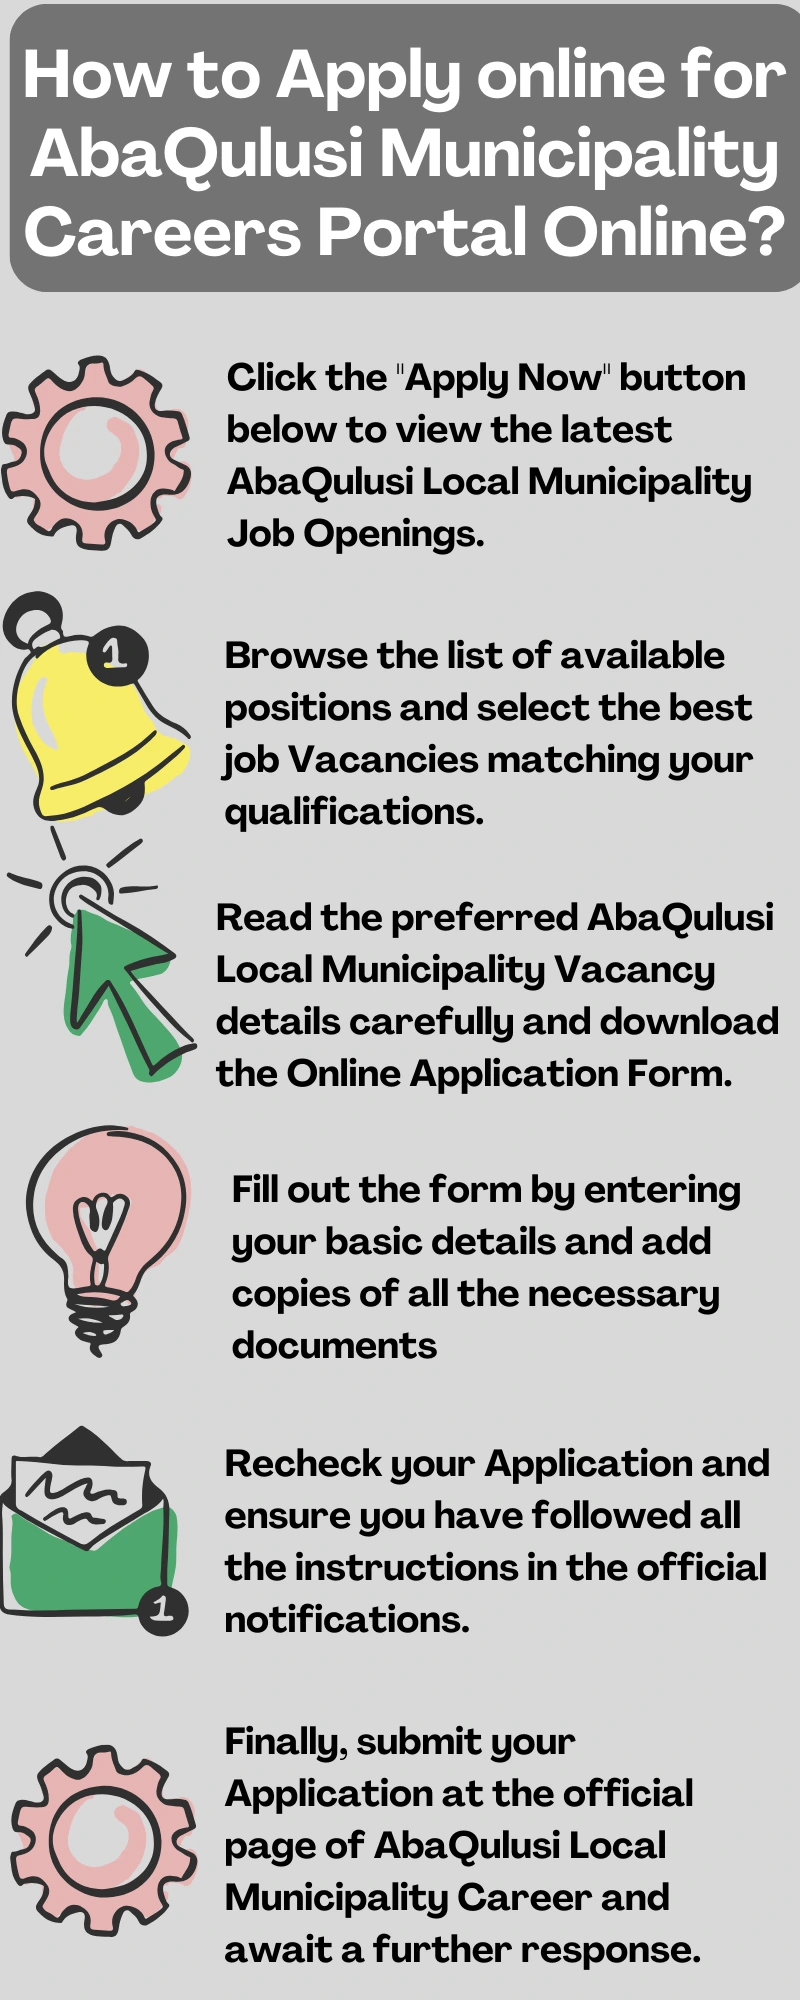 How to Apply online for AbaQulusi Municipality Careers Portal Online?